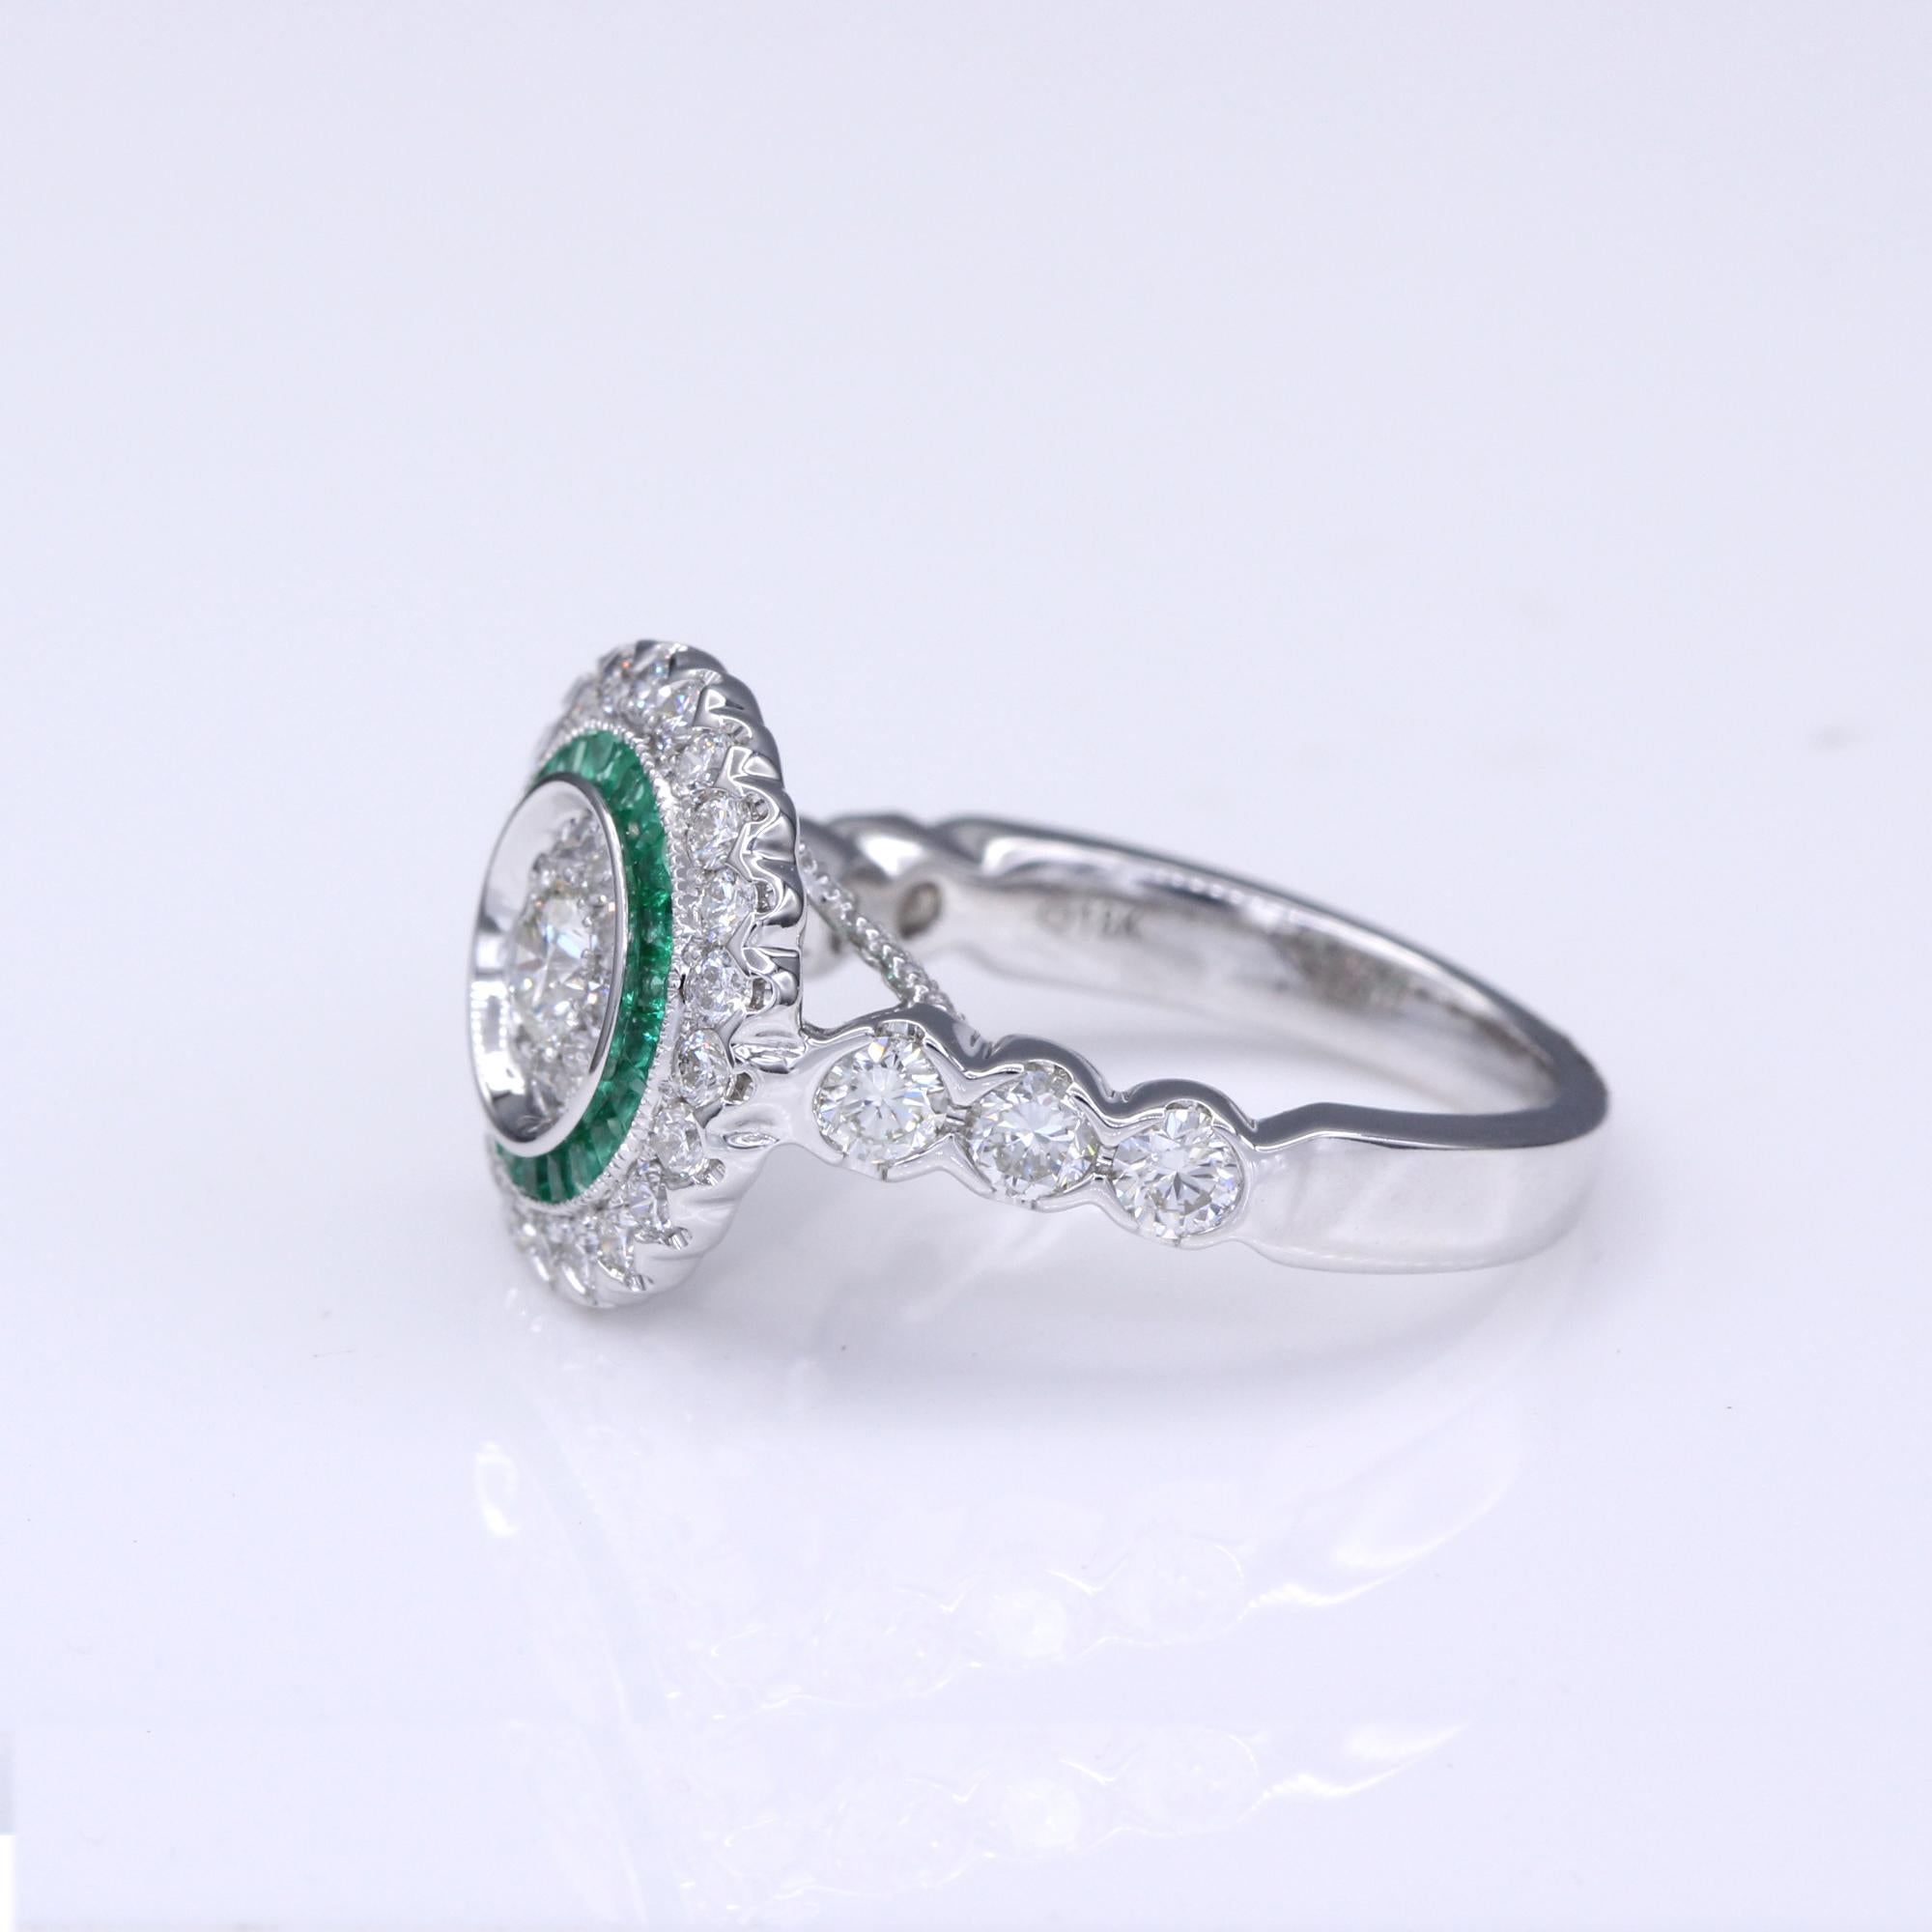 Art Deco Style Ring 18 Karat White Gold Diamonds and Green Emerald Art Deco Ring For Sale 3